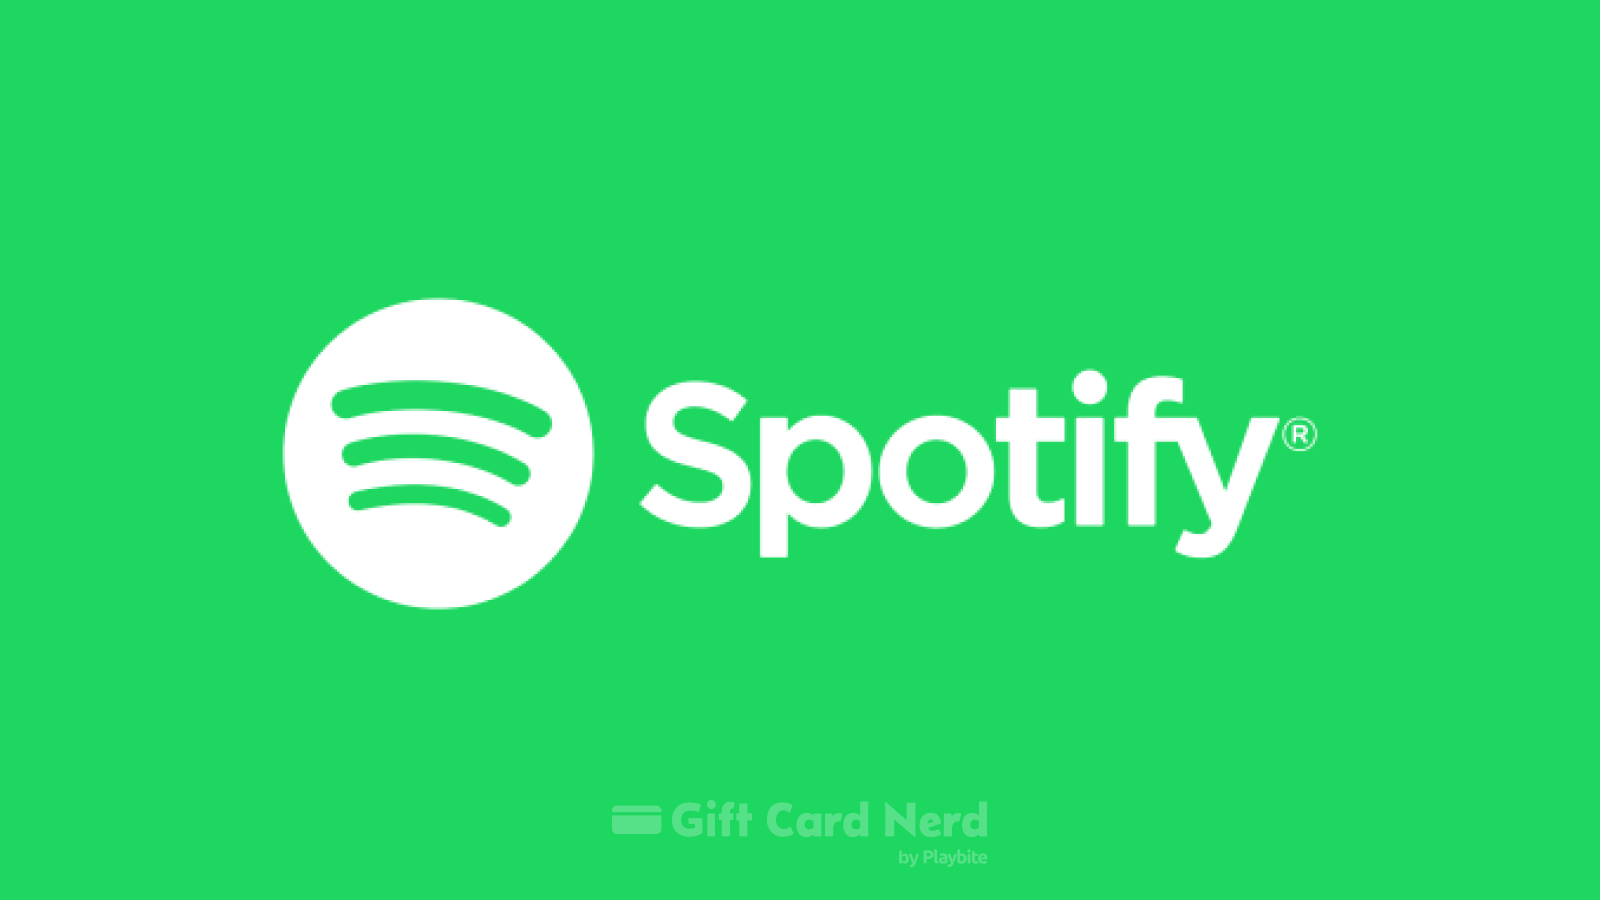 Can You Use a Spotify Gift Card on Amazon?